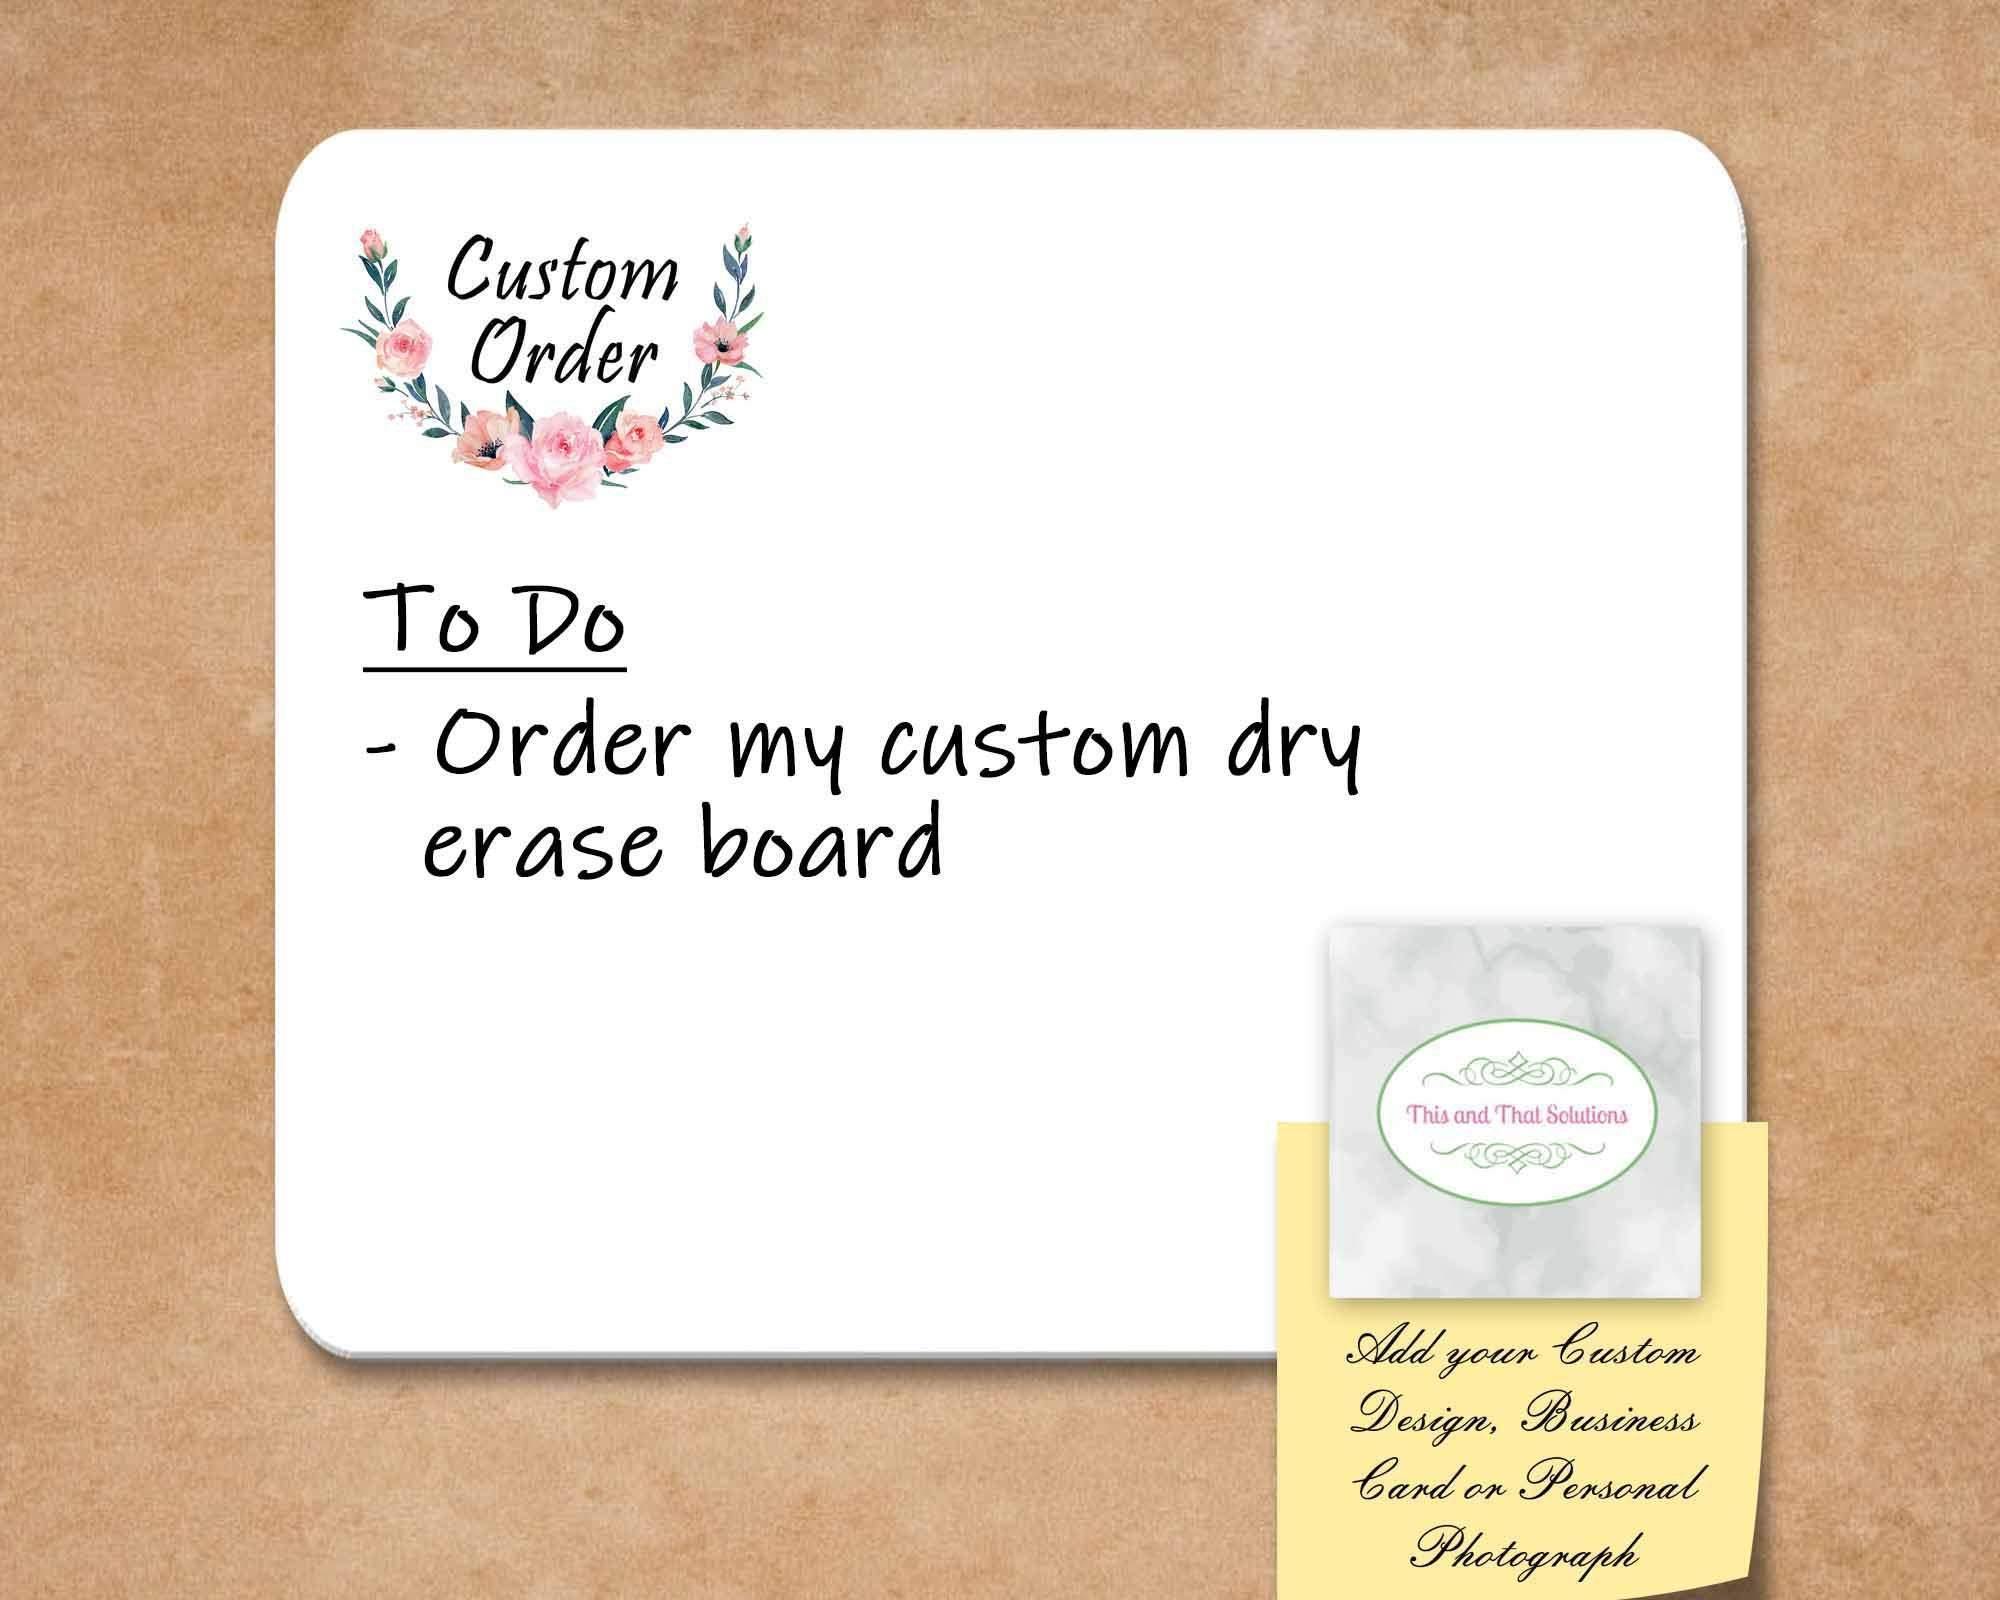 Customized Dry Erase Boards | Personalized Office Accessories | Custom Order - This & That Solutions - Customized Dry Erase Boards | Personalized Office Accessories | Custom Order - Personalized Gifts & Custom Home Decor